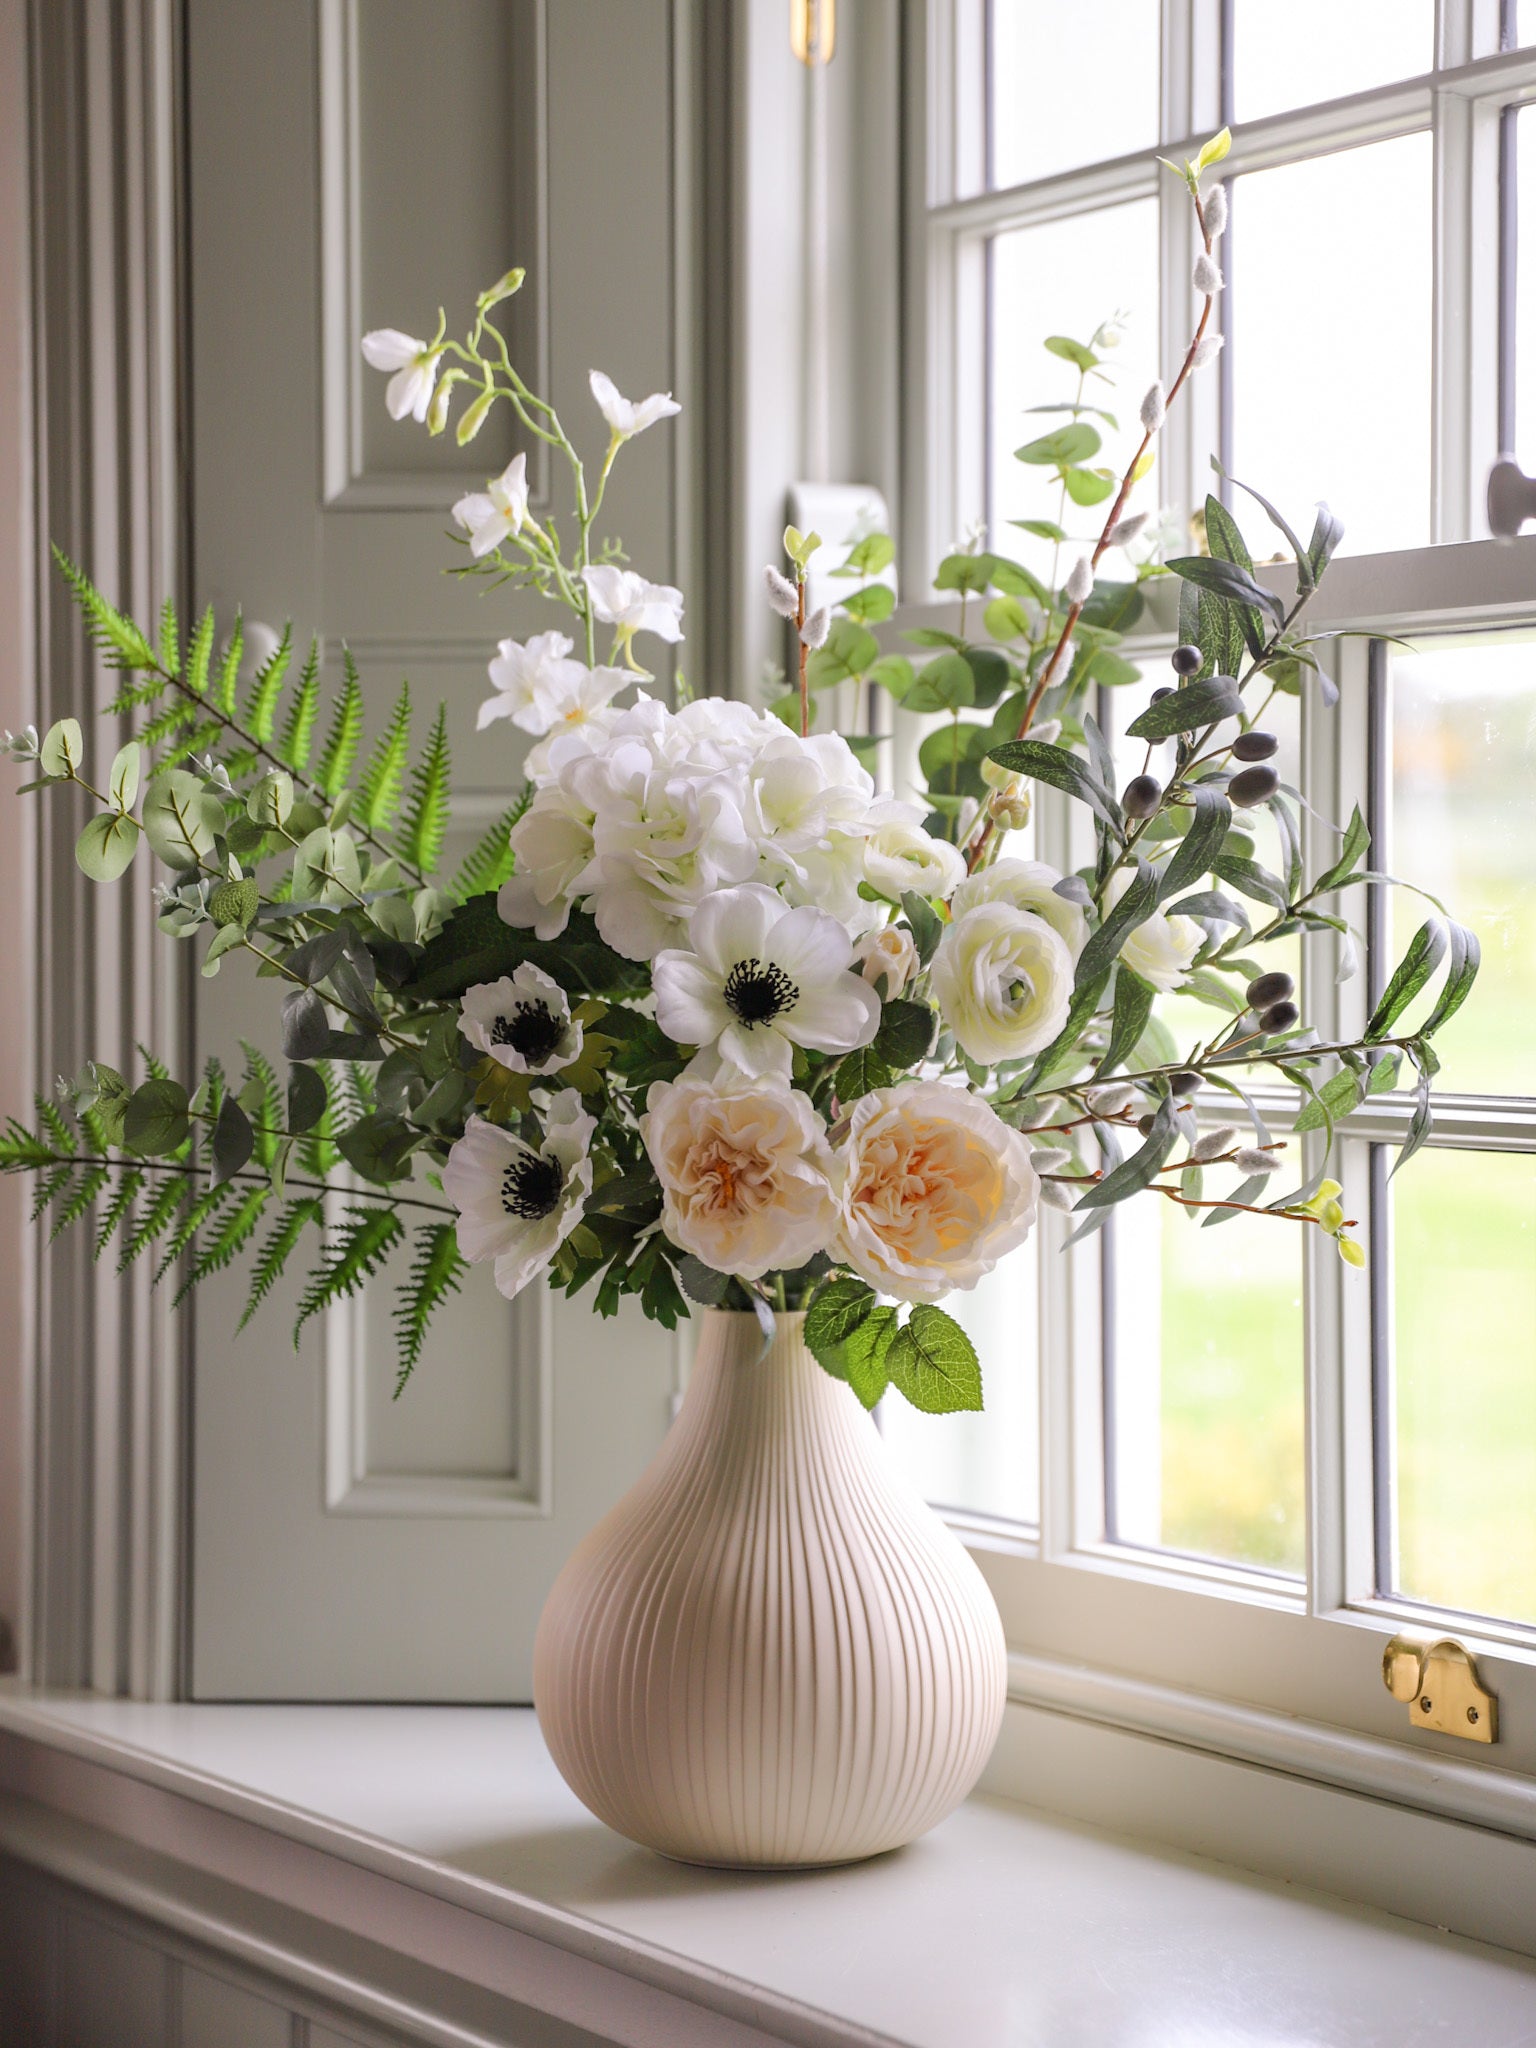 Elegant Black and White Vases with Stunning White Flowers on a